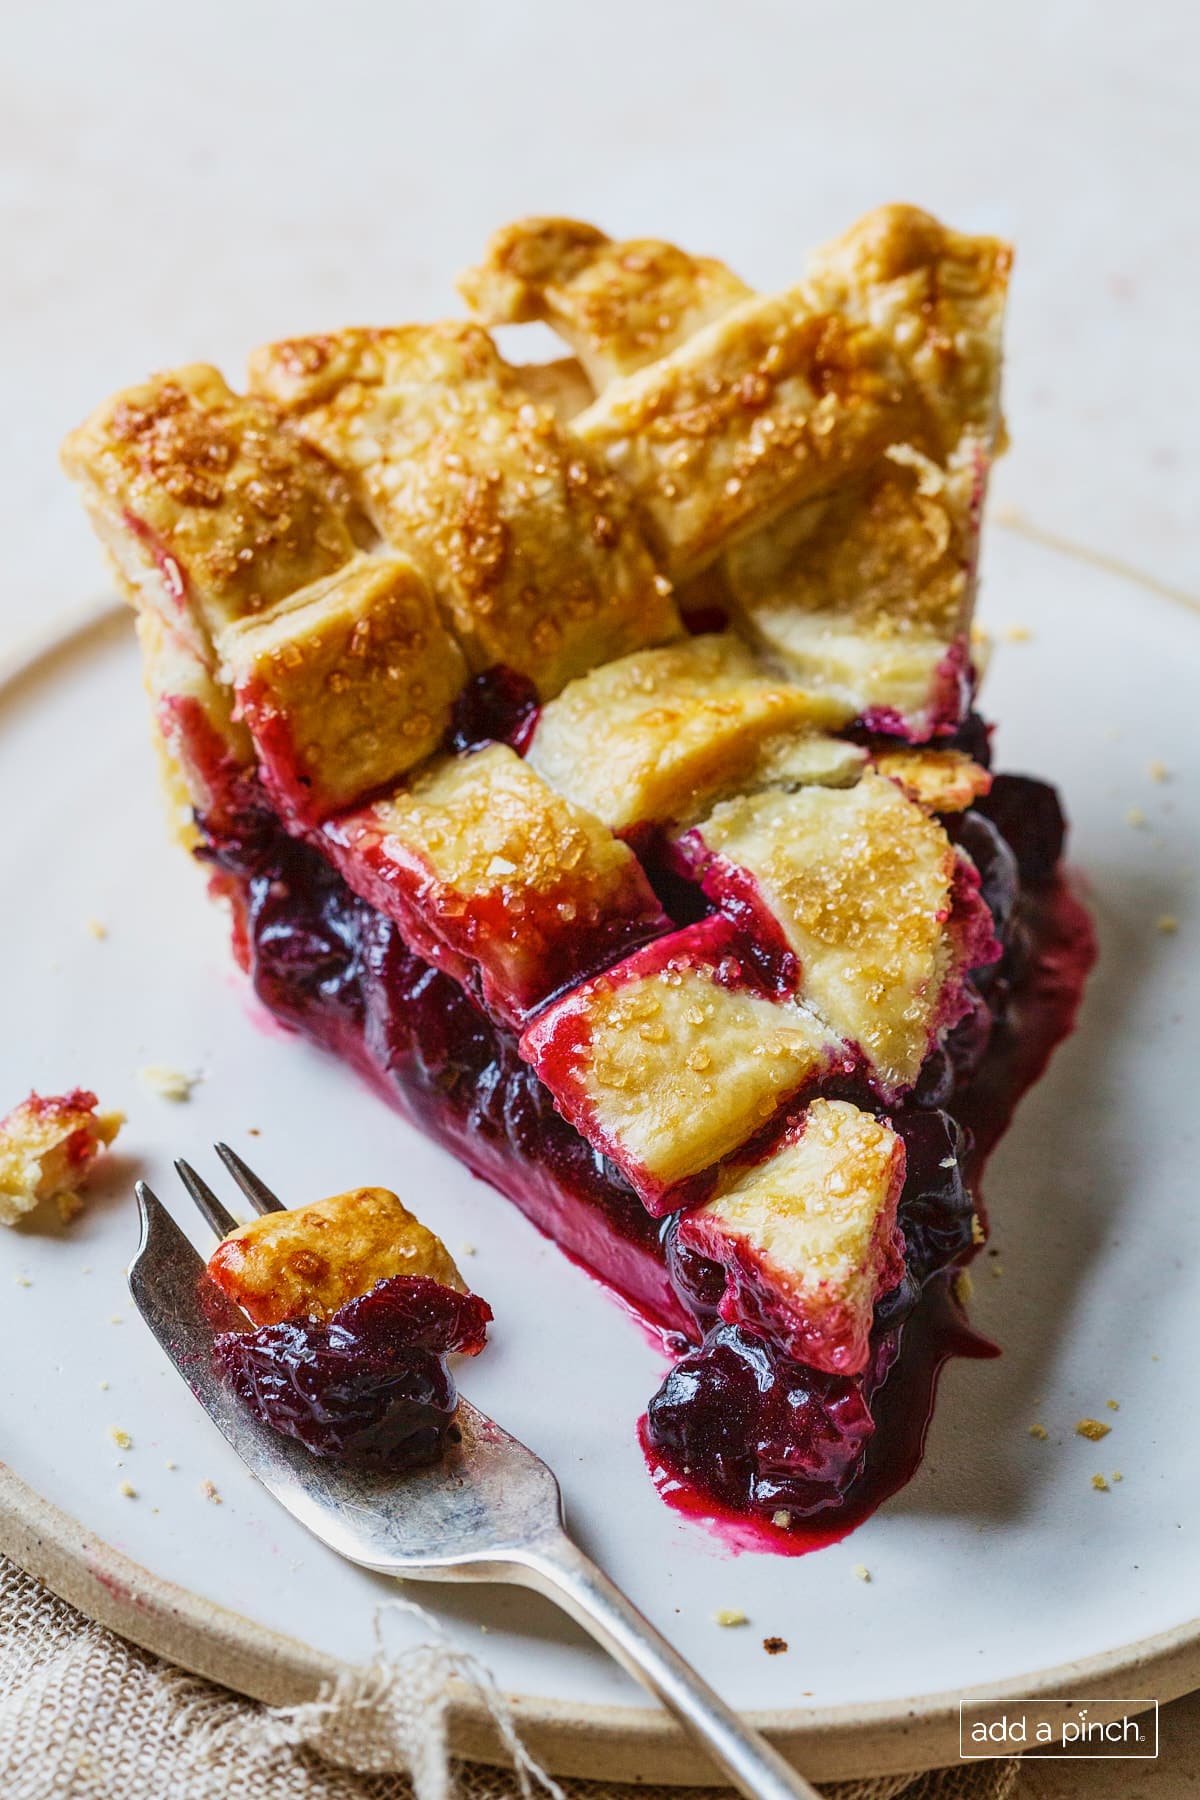 Slice of cherry pie with a lattice pie crust topping.